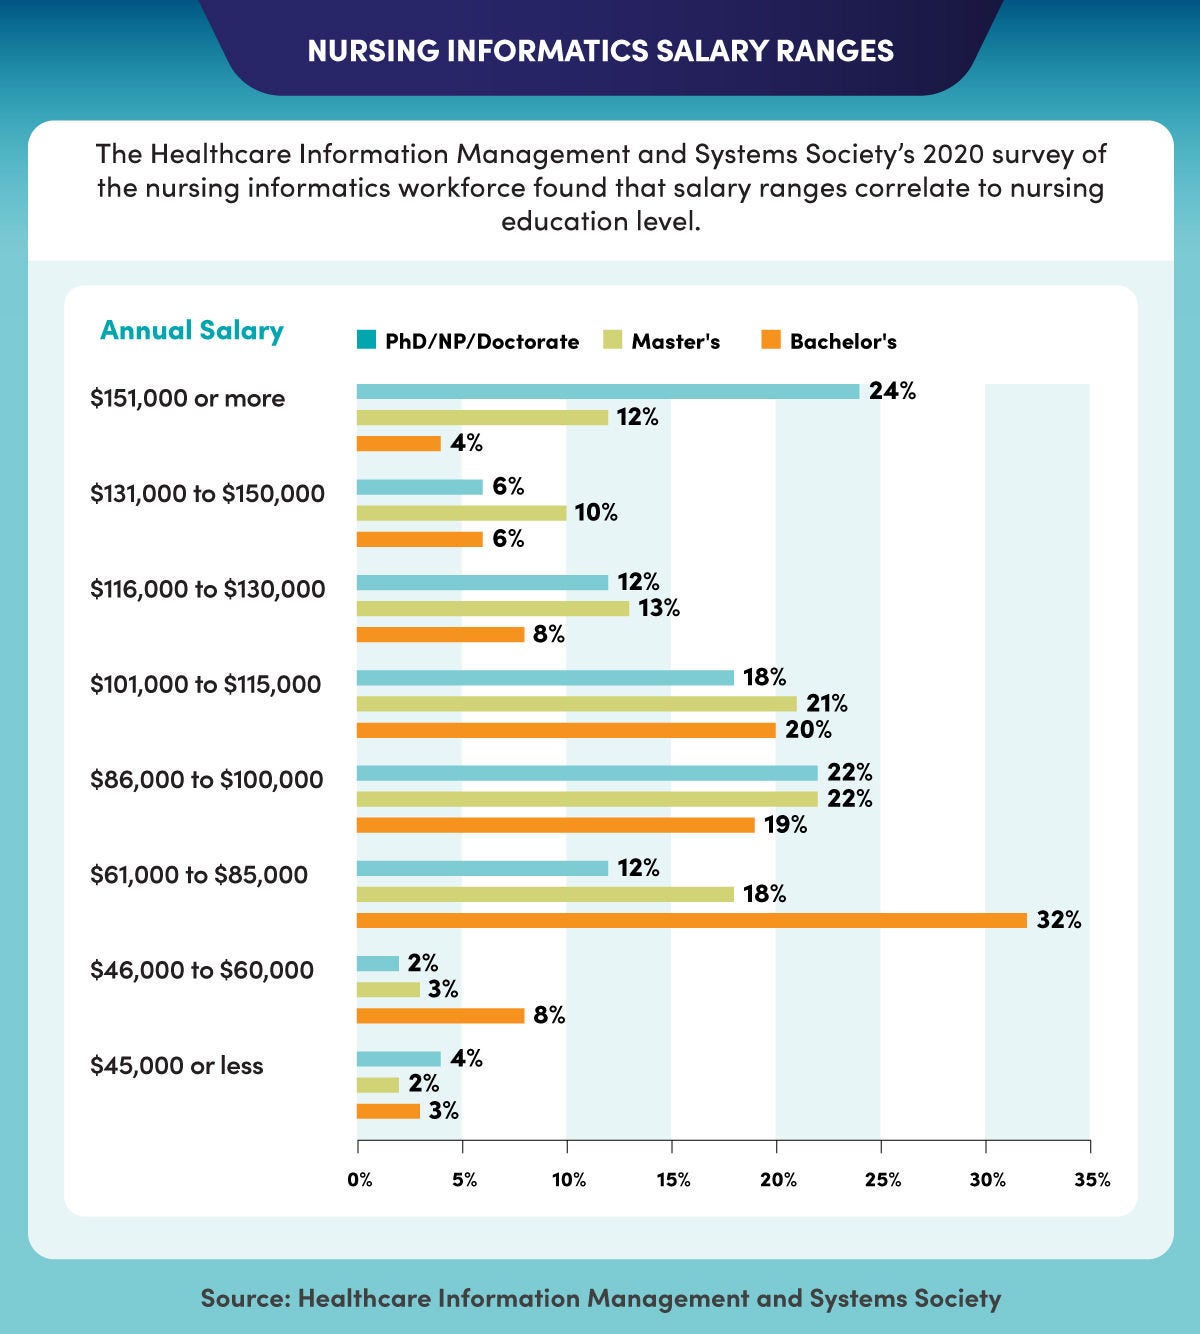 A comparison of salary and education level in nursing informatics.